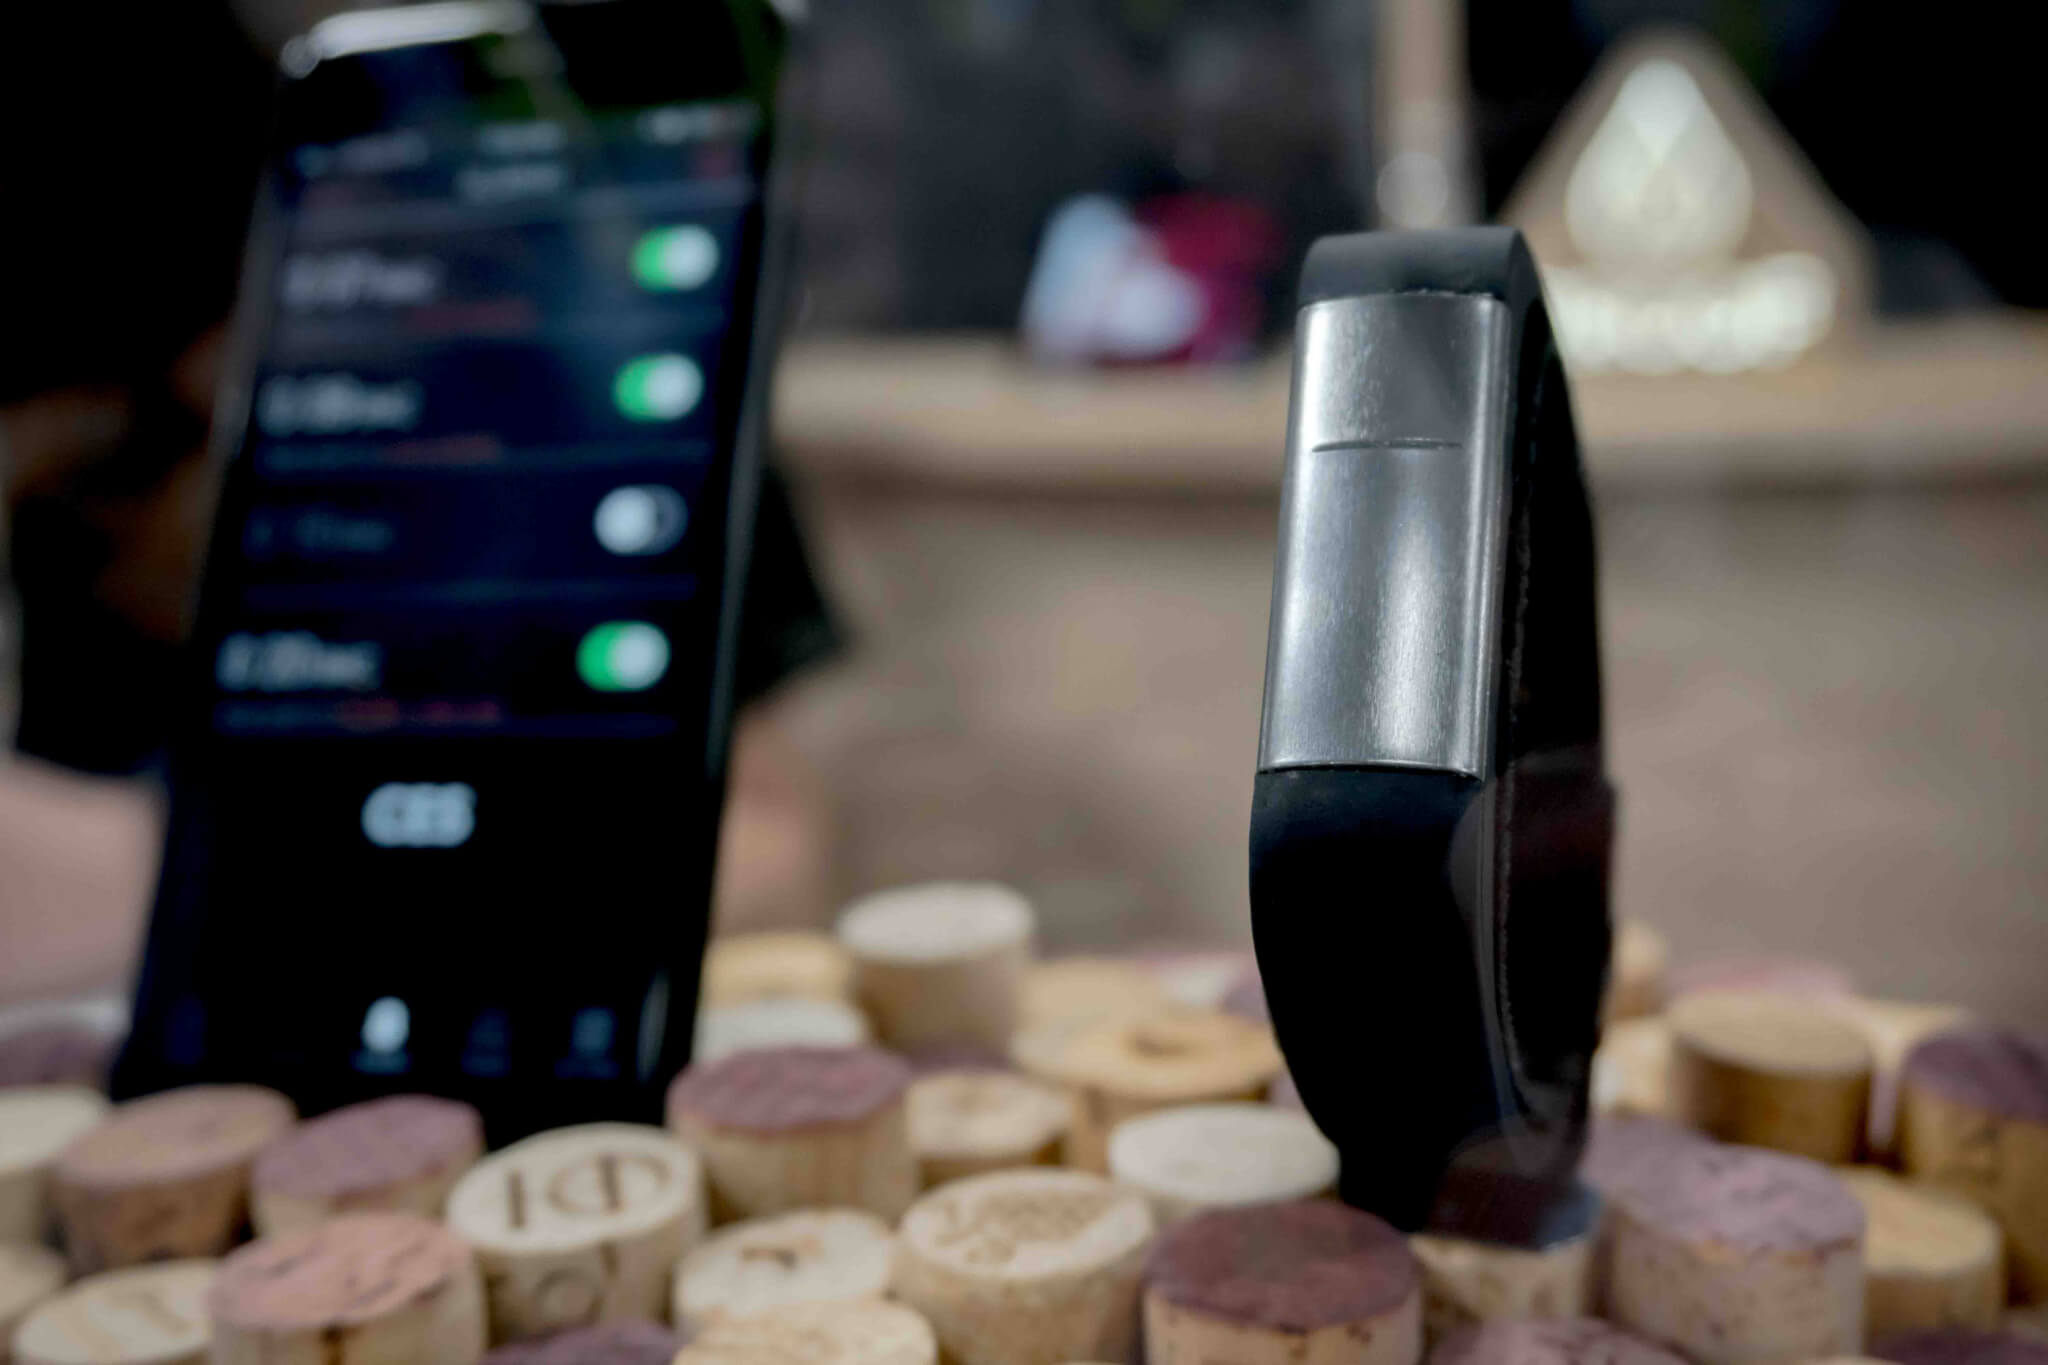 Proof is a wearable device that tells you when you've had too much to drink.